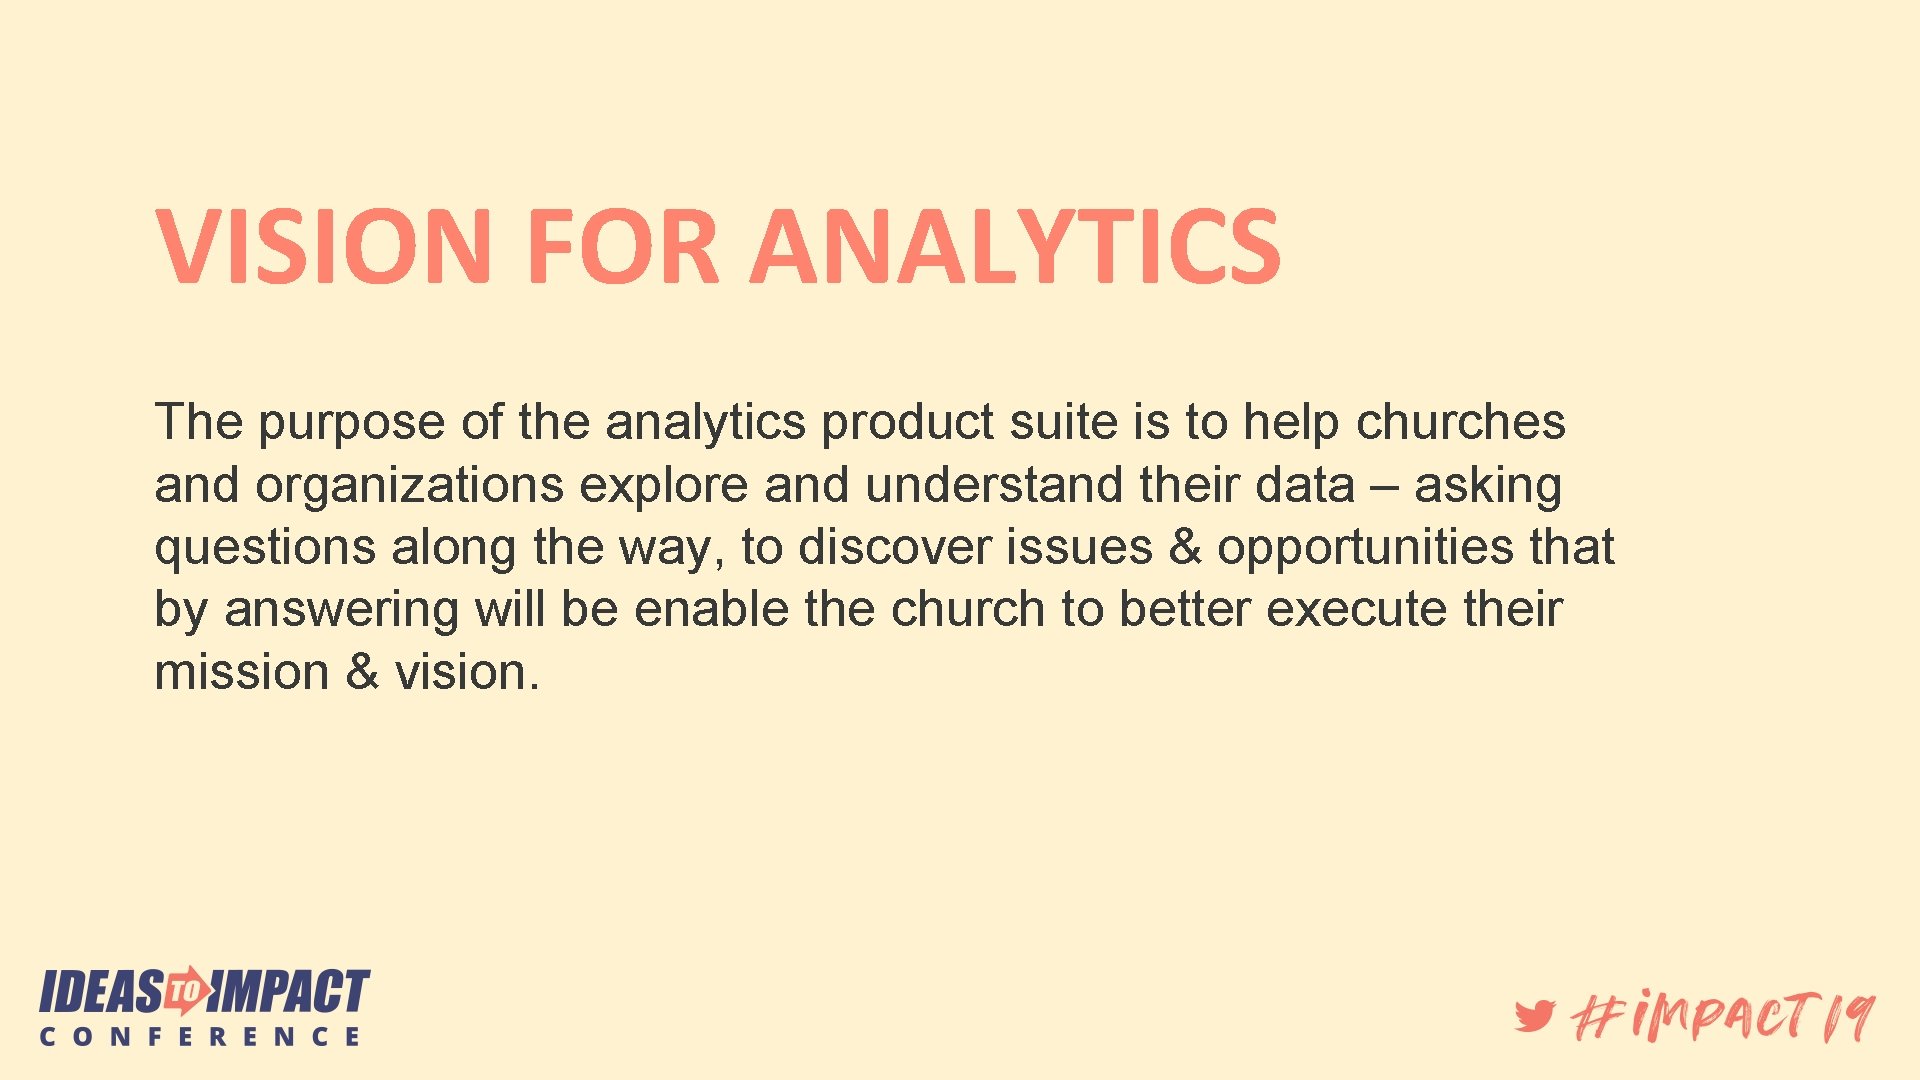 VISION FOR ANALYTICS The purpose of the analytics product suite is to help churches